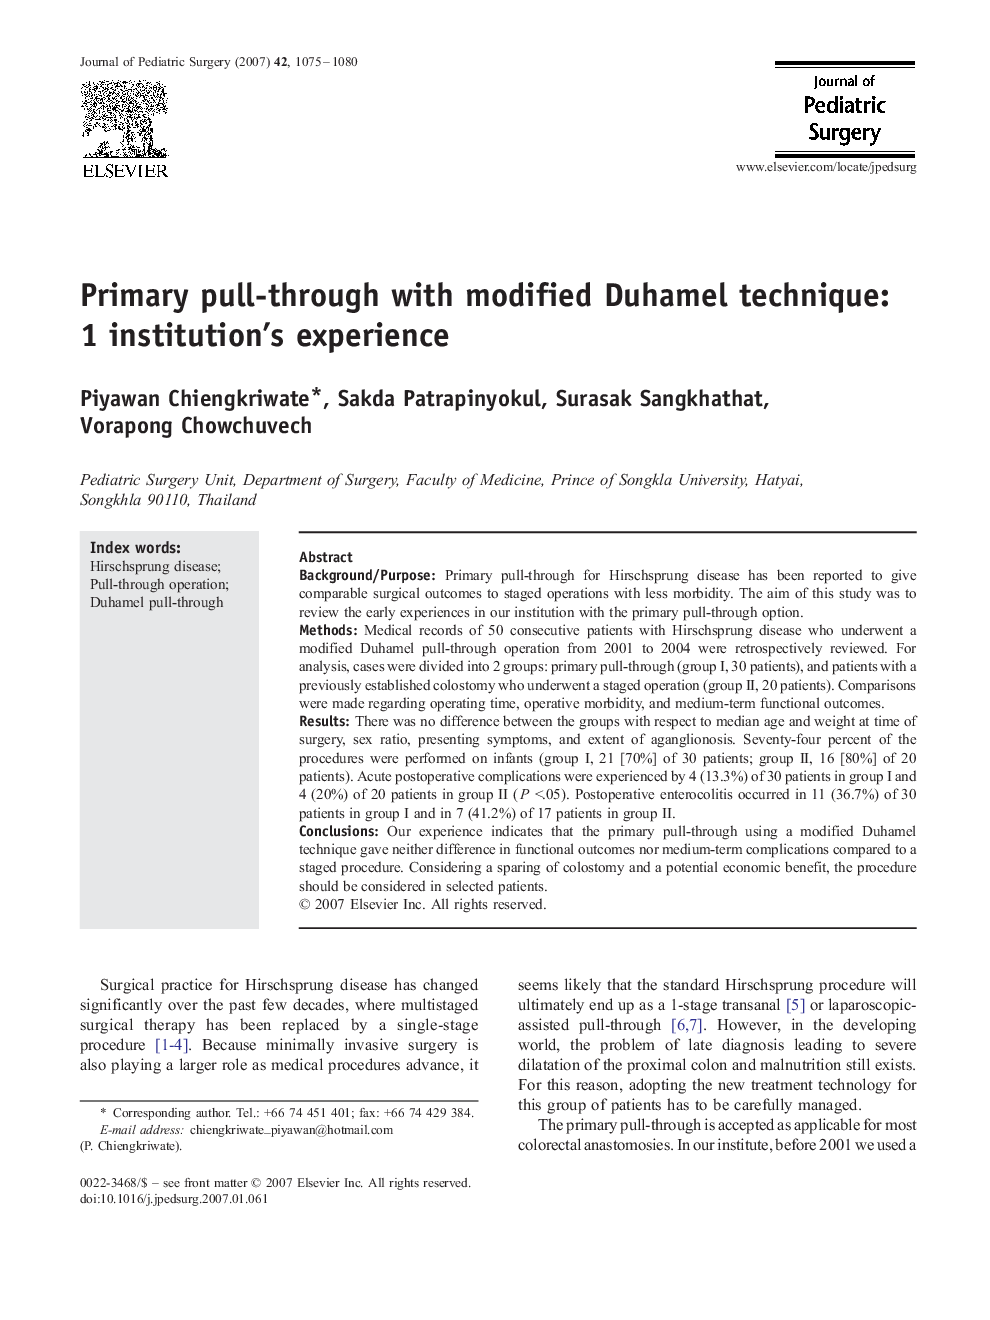 Primary pull-through with modified Duhamel technique: 1 institution's experience